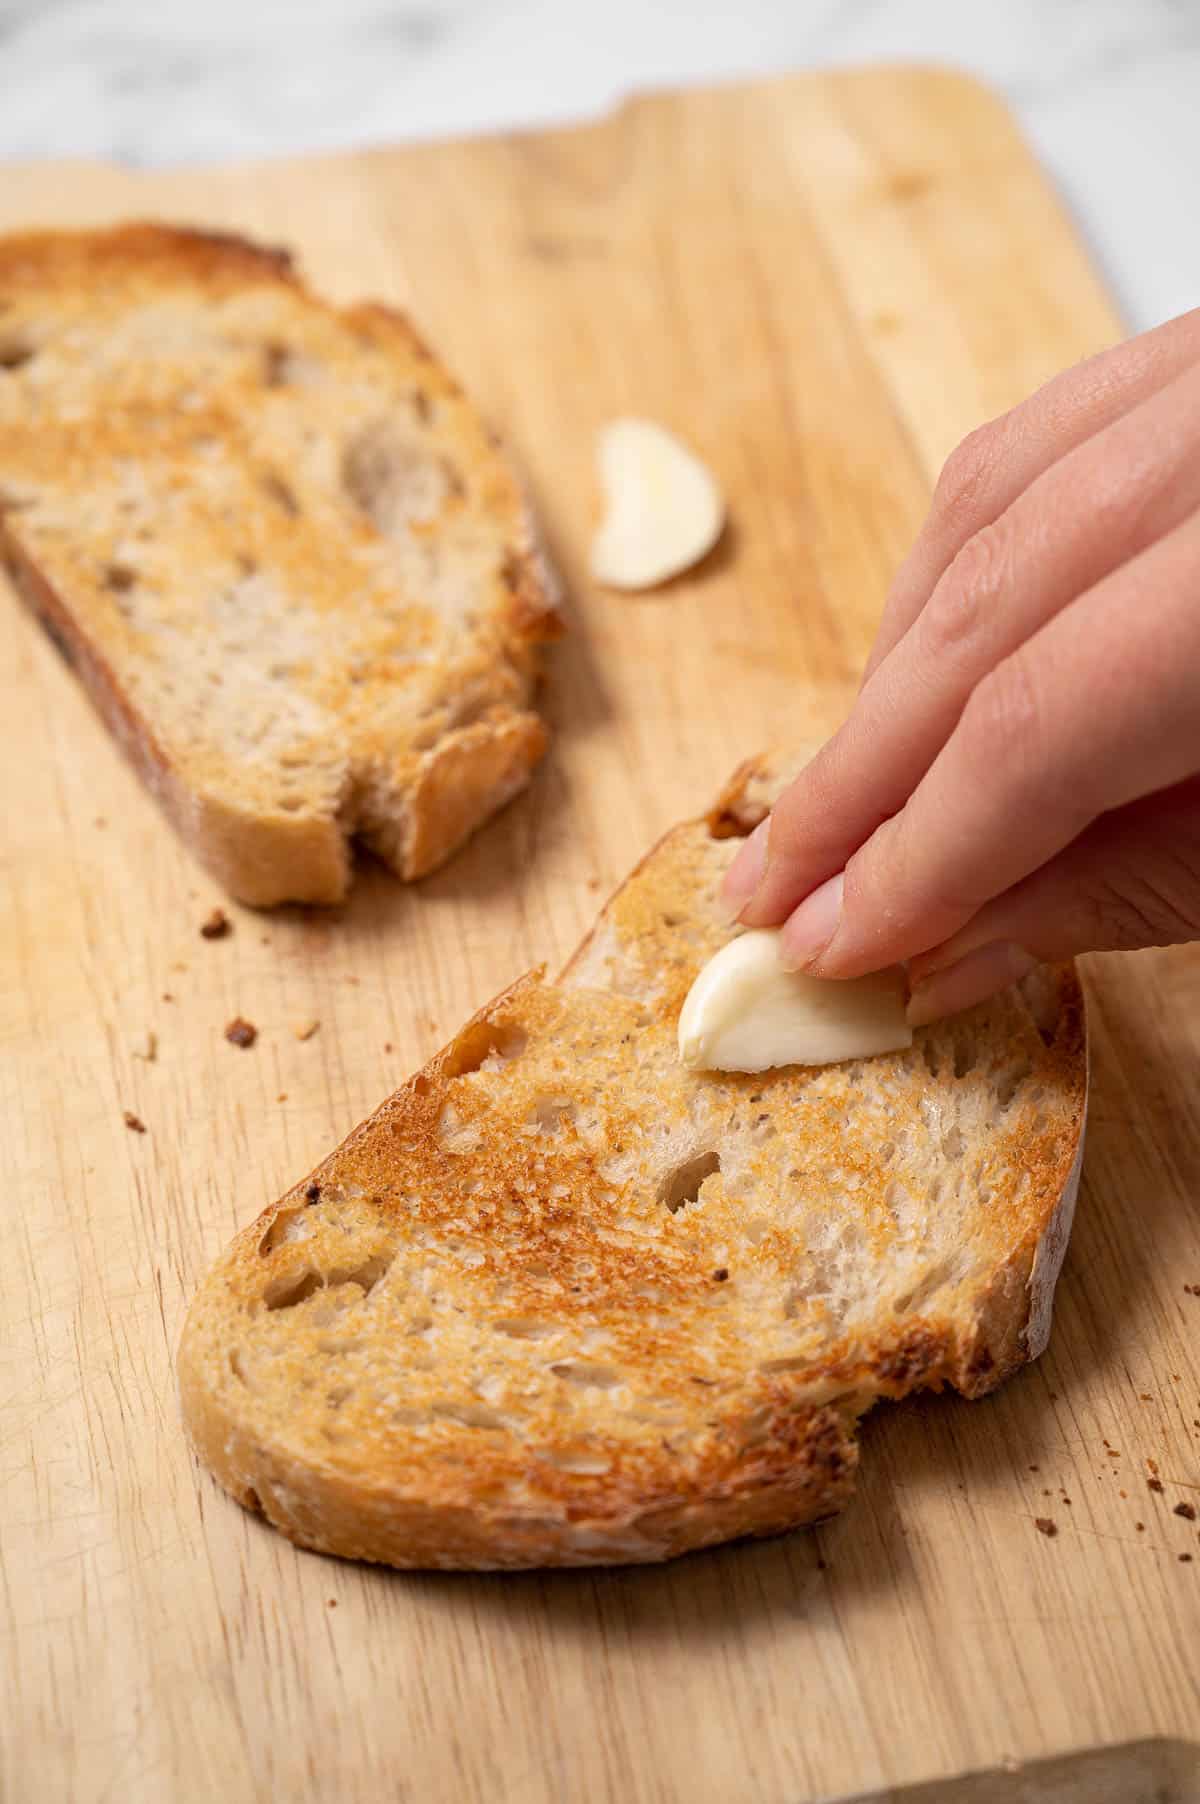 Close-up of someone rubbing a garlic clove on toasted bread to make Catalan tomato bread.